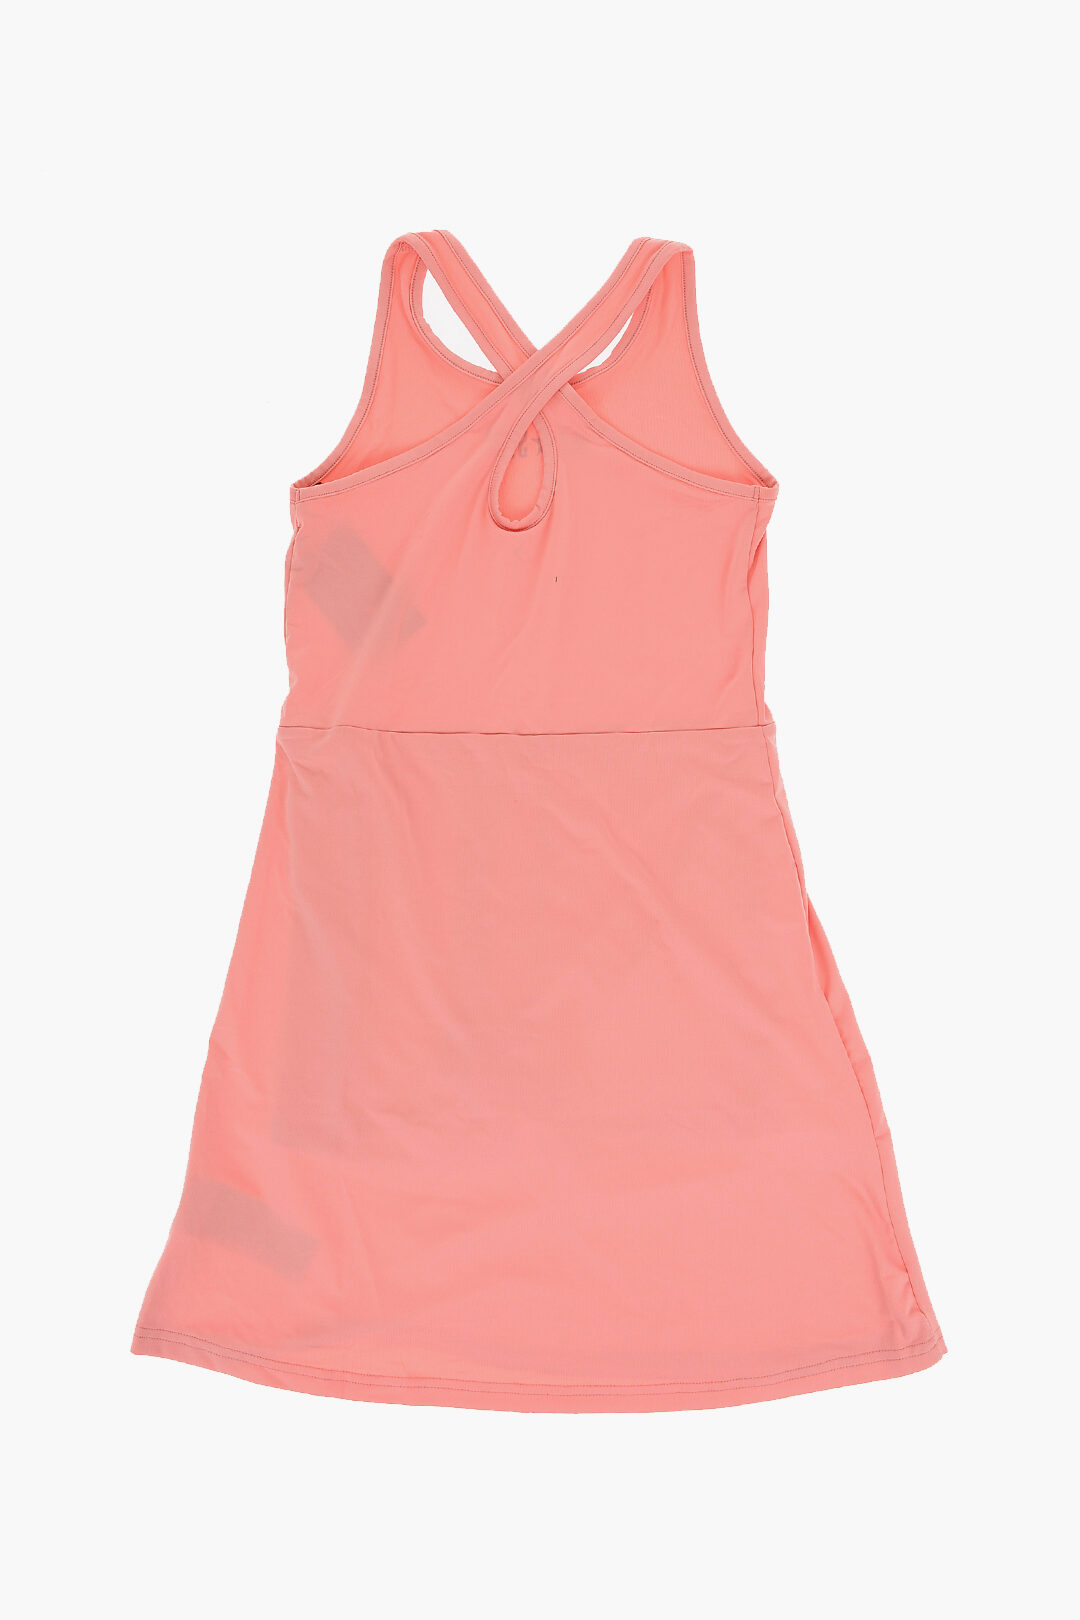 Converse KIDS ALL STAR CHUCK TAYLOR Perforated Tank Top with Inner Sport  Bra girls - Glamood Outlet